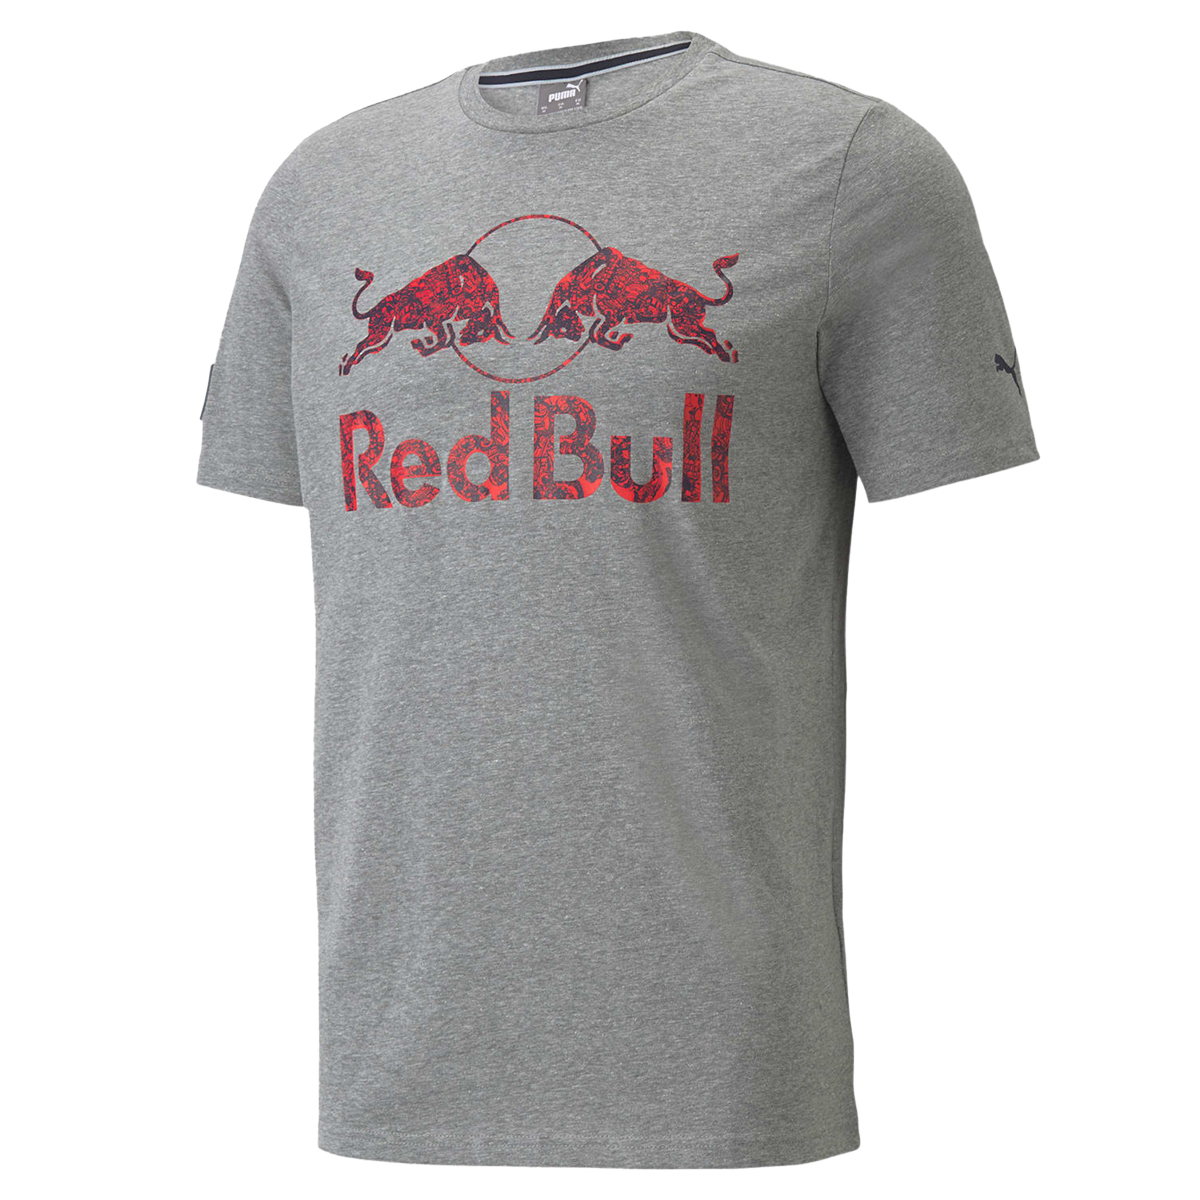 Remera Puma Rbr Double Bull,  image number null